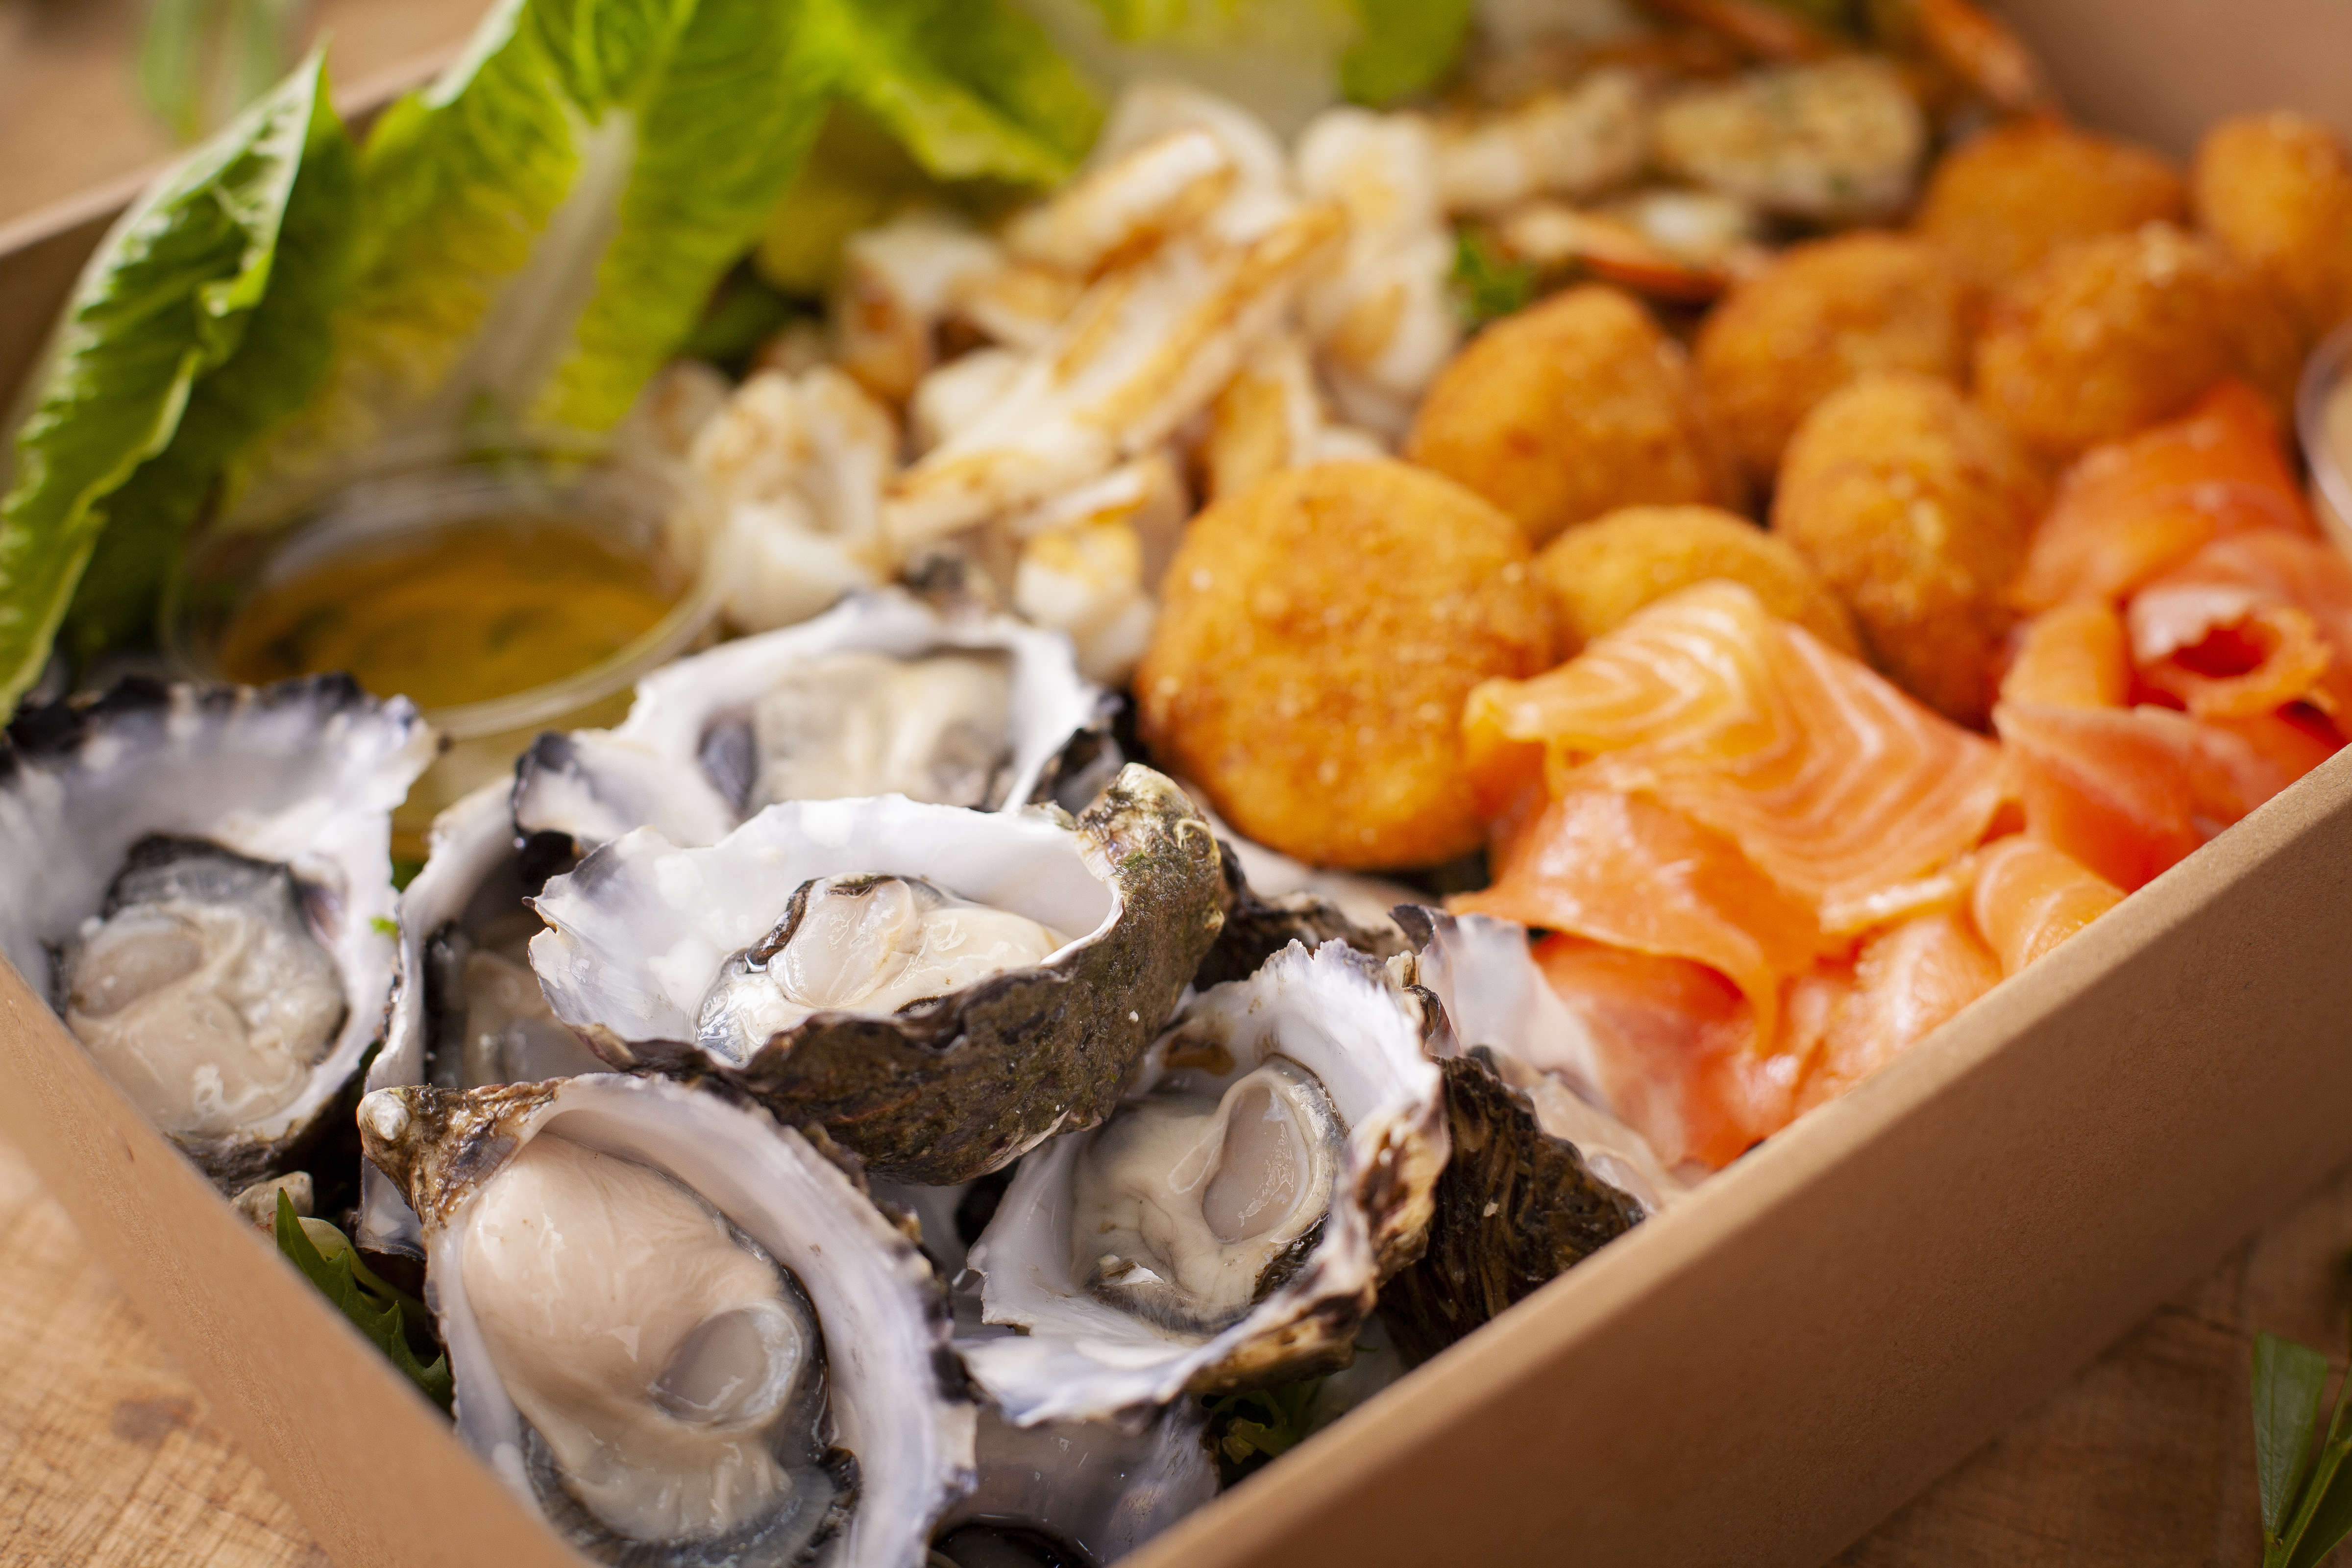 Close up of Christmas Seafood Box - includes fresh oysters, prawns, smoked salmon, fish cakes. Photo: Richard Jupe.